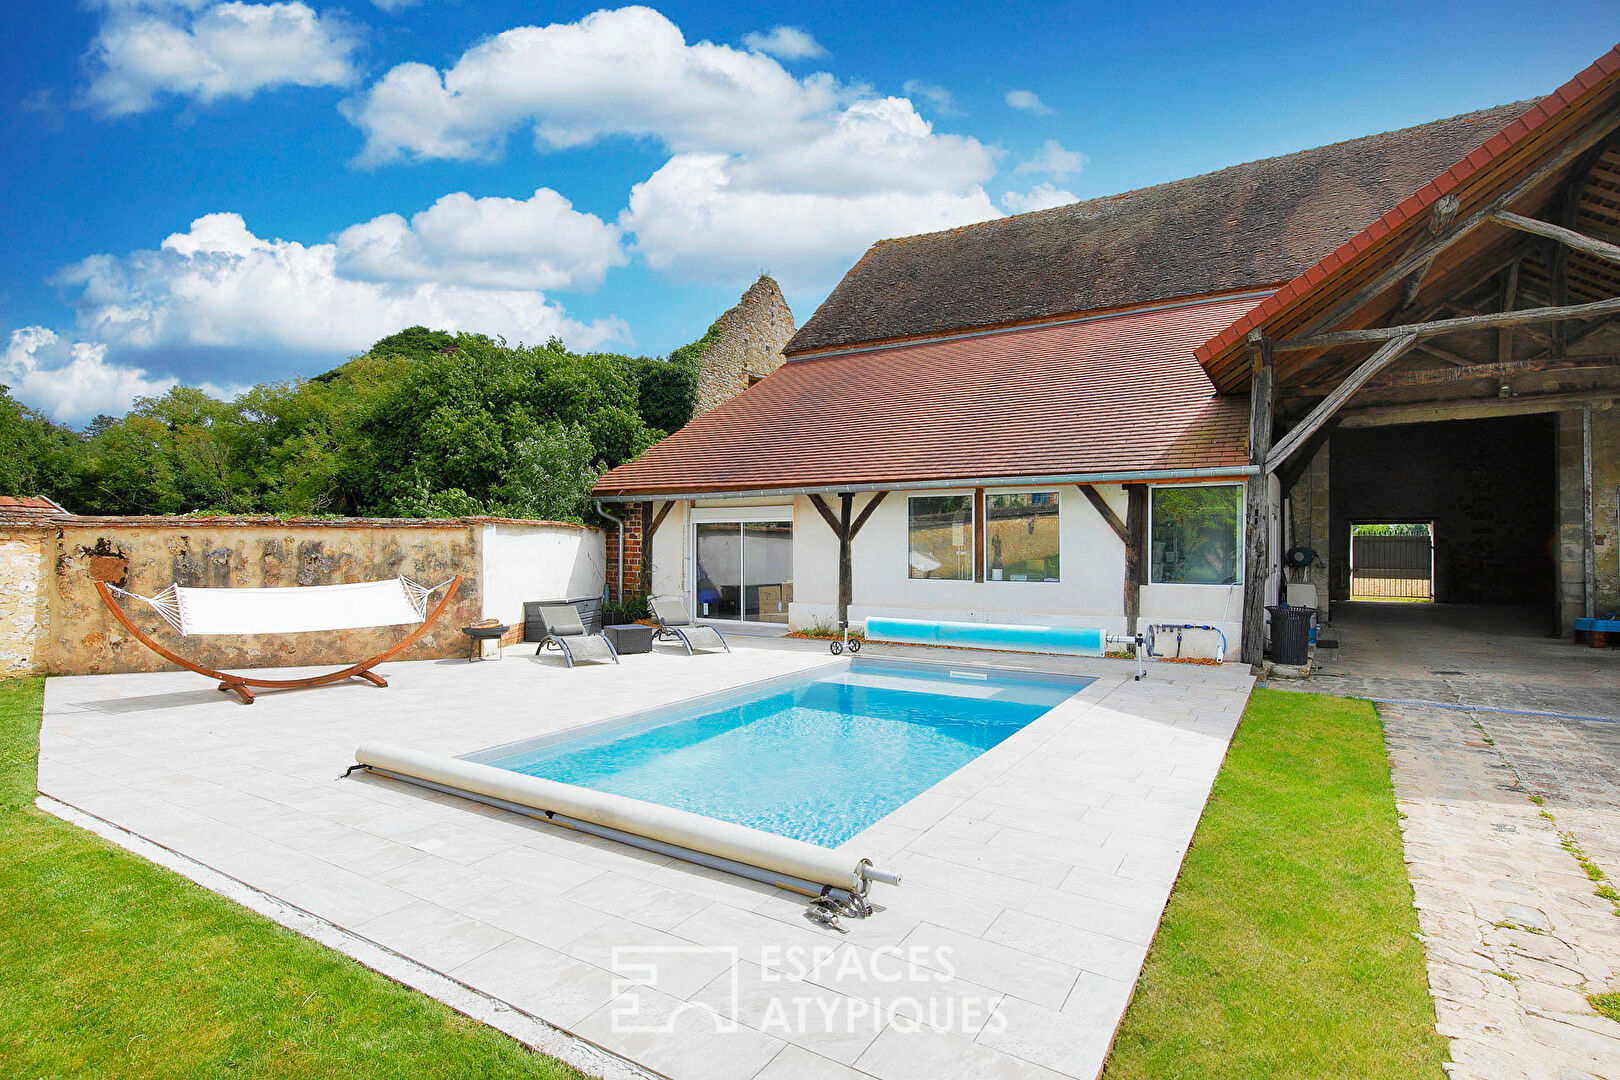 Character house with outbuildings, swimming pool and garden